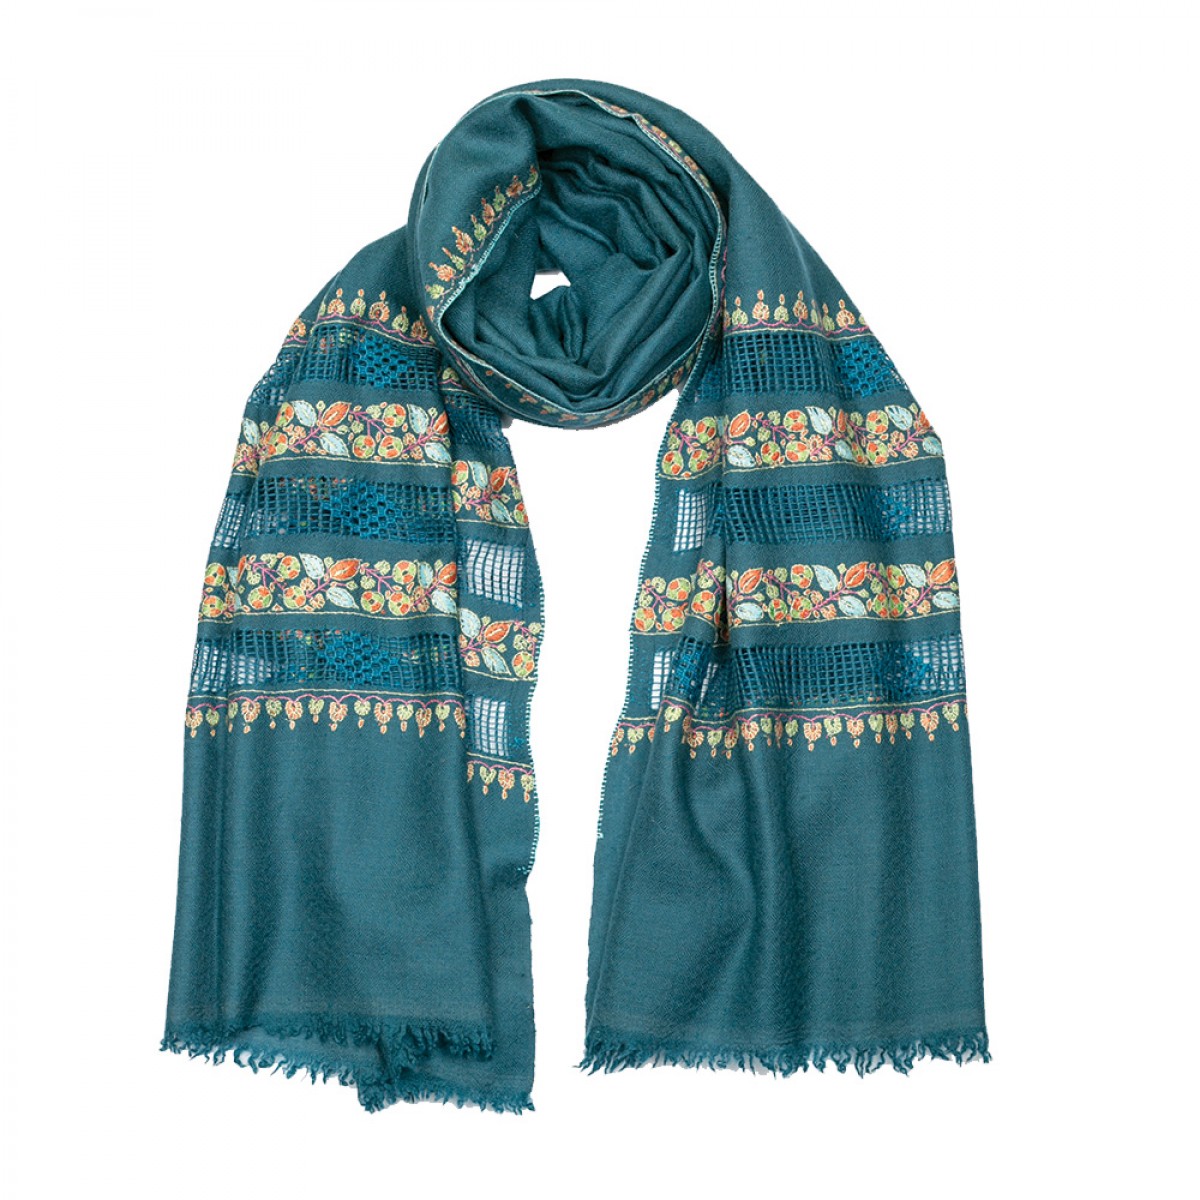 Embroidered Pashmina stole - Blue